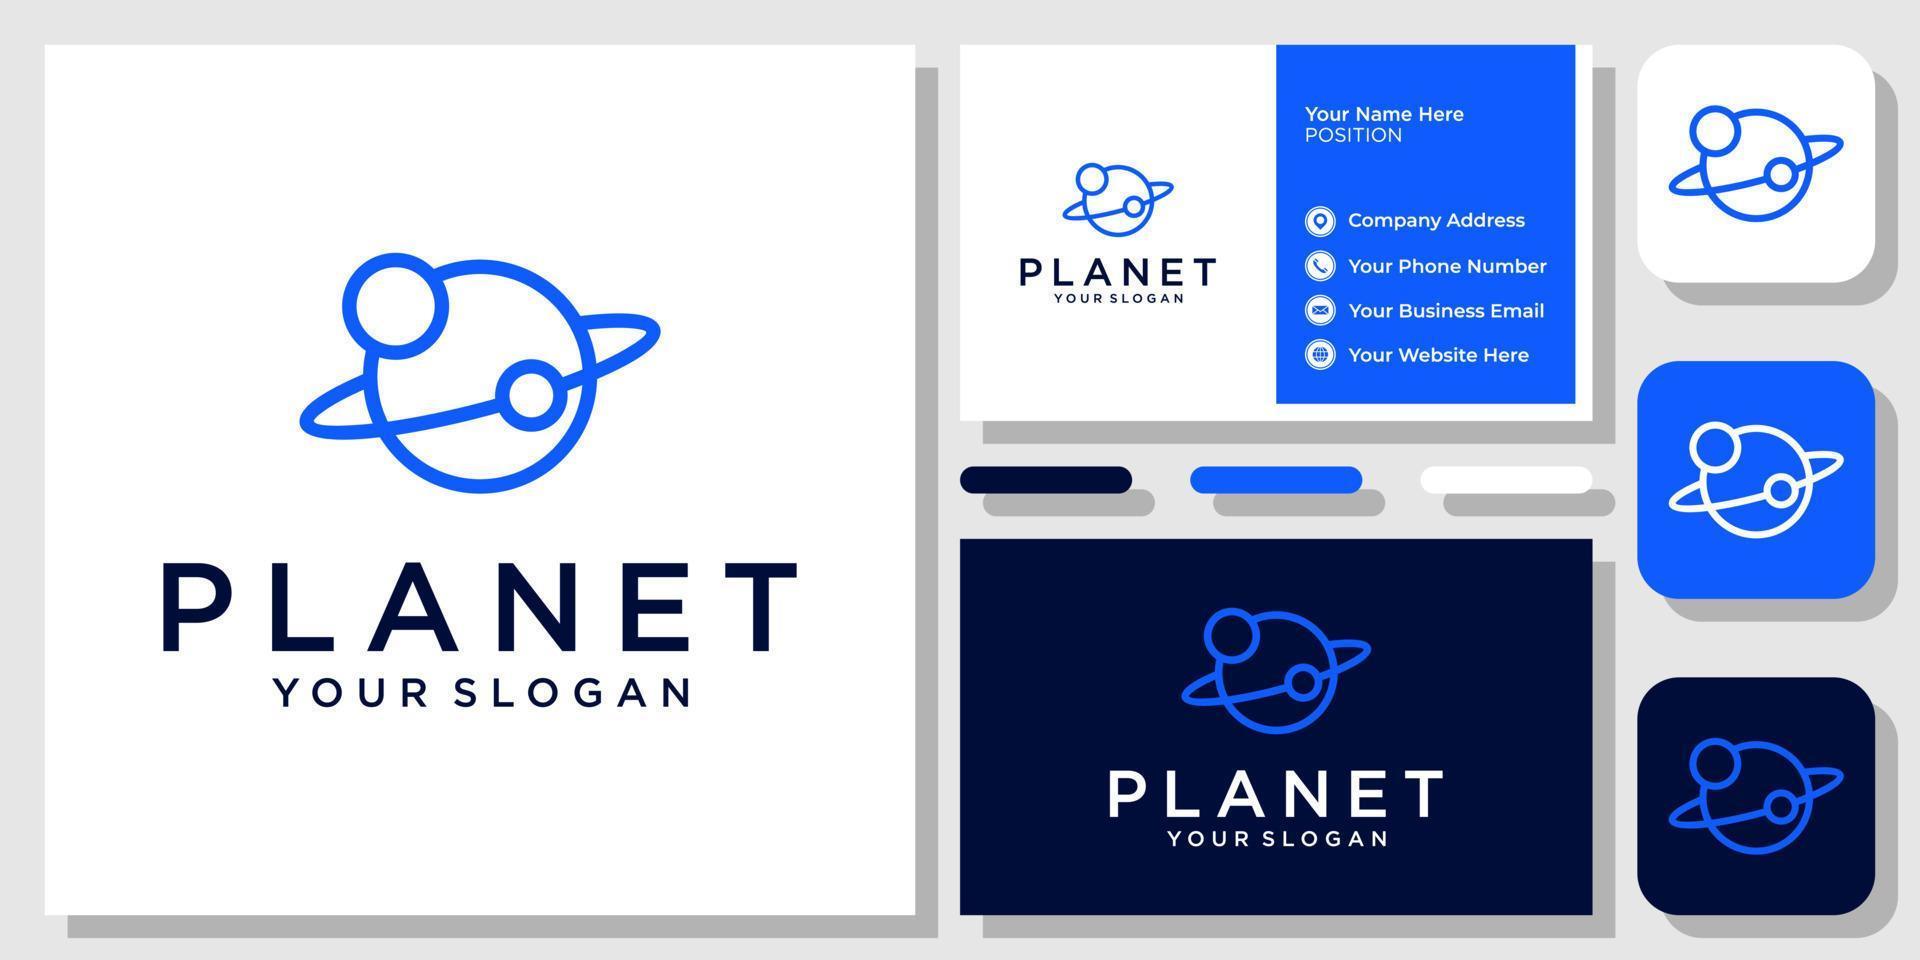 Planet Orbit Circle Universe Space Cosmos Sky Satellite Icon Logo Design with Business Card Template vector